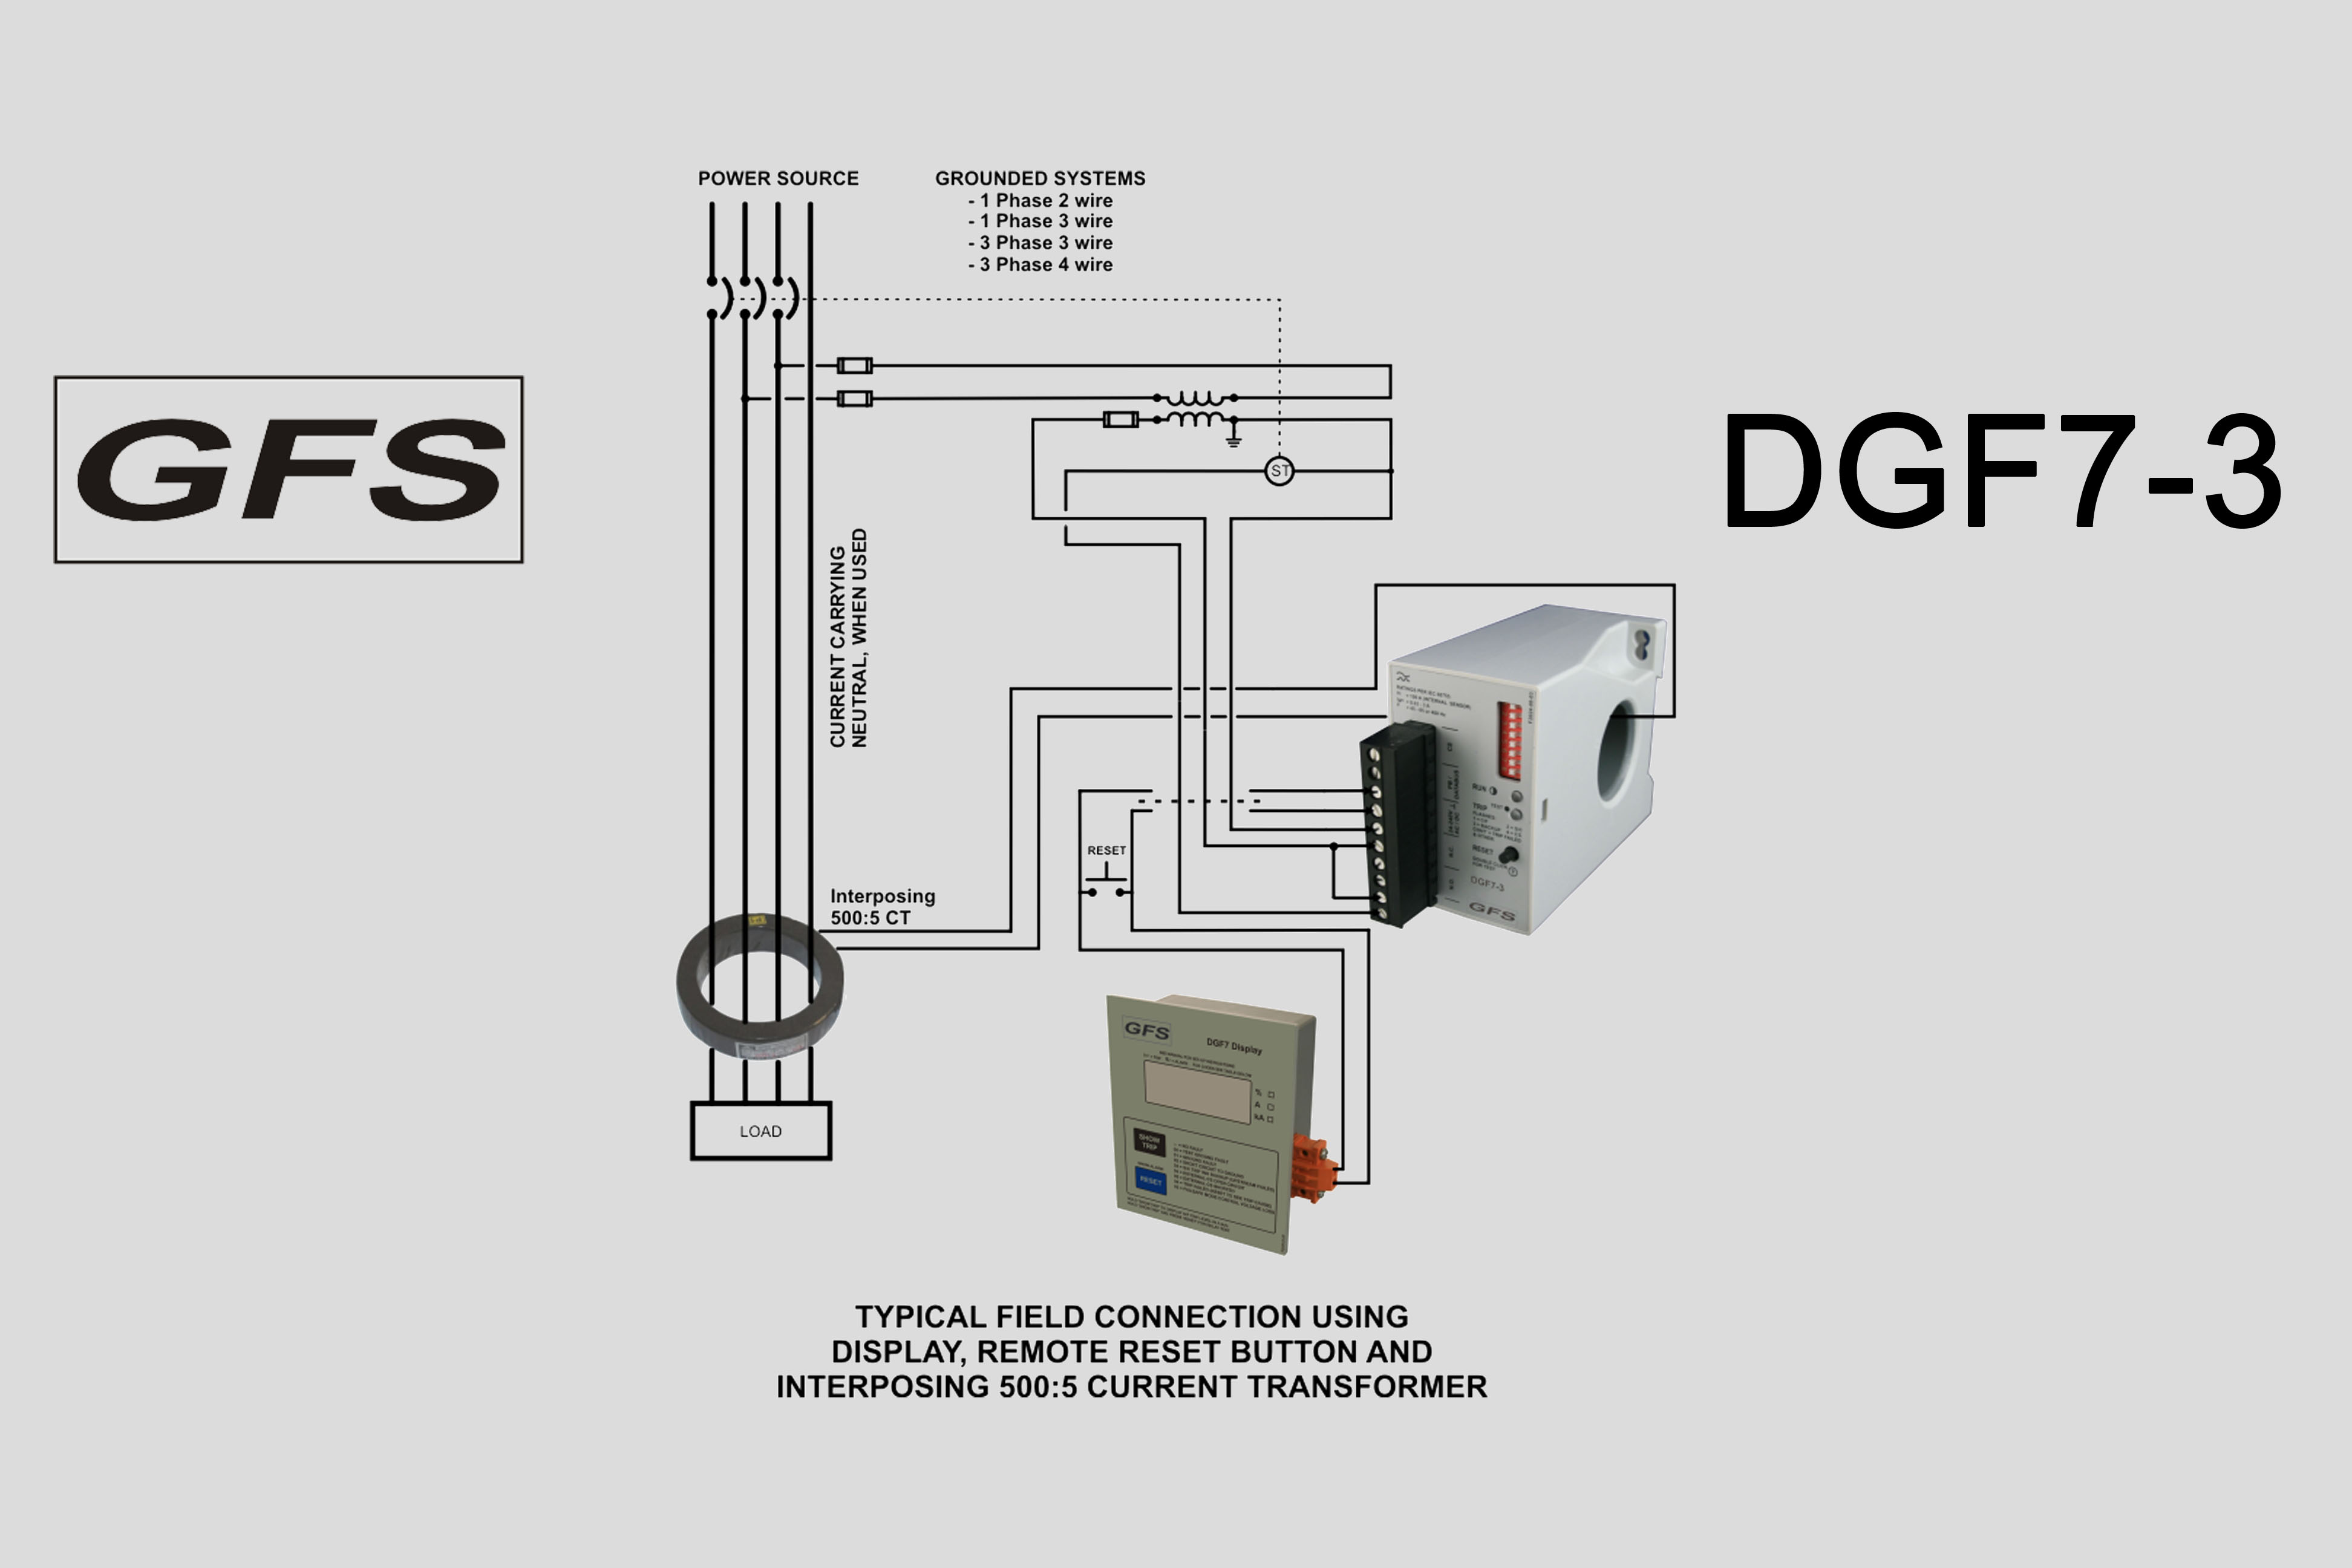 Ground Fault Relay DGF7-3 typical field connection using interposing current transformer